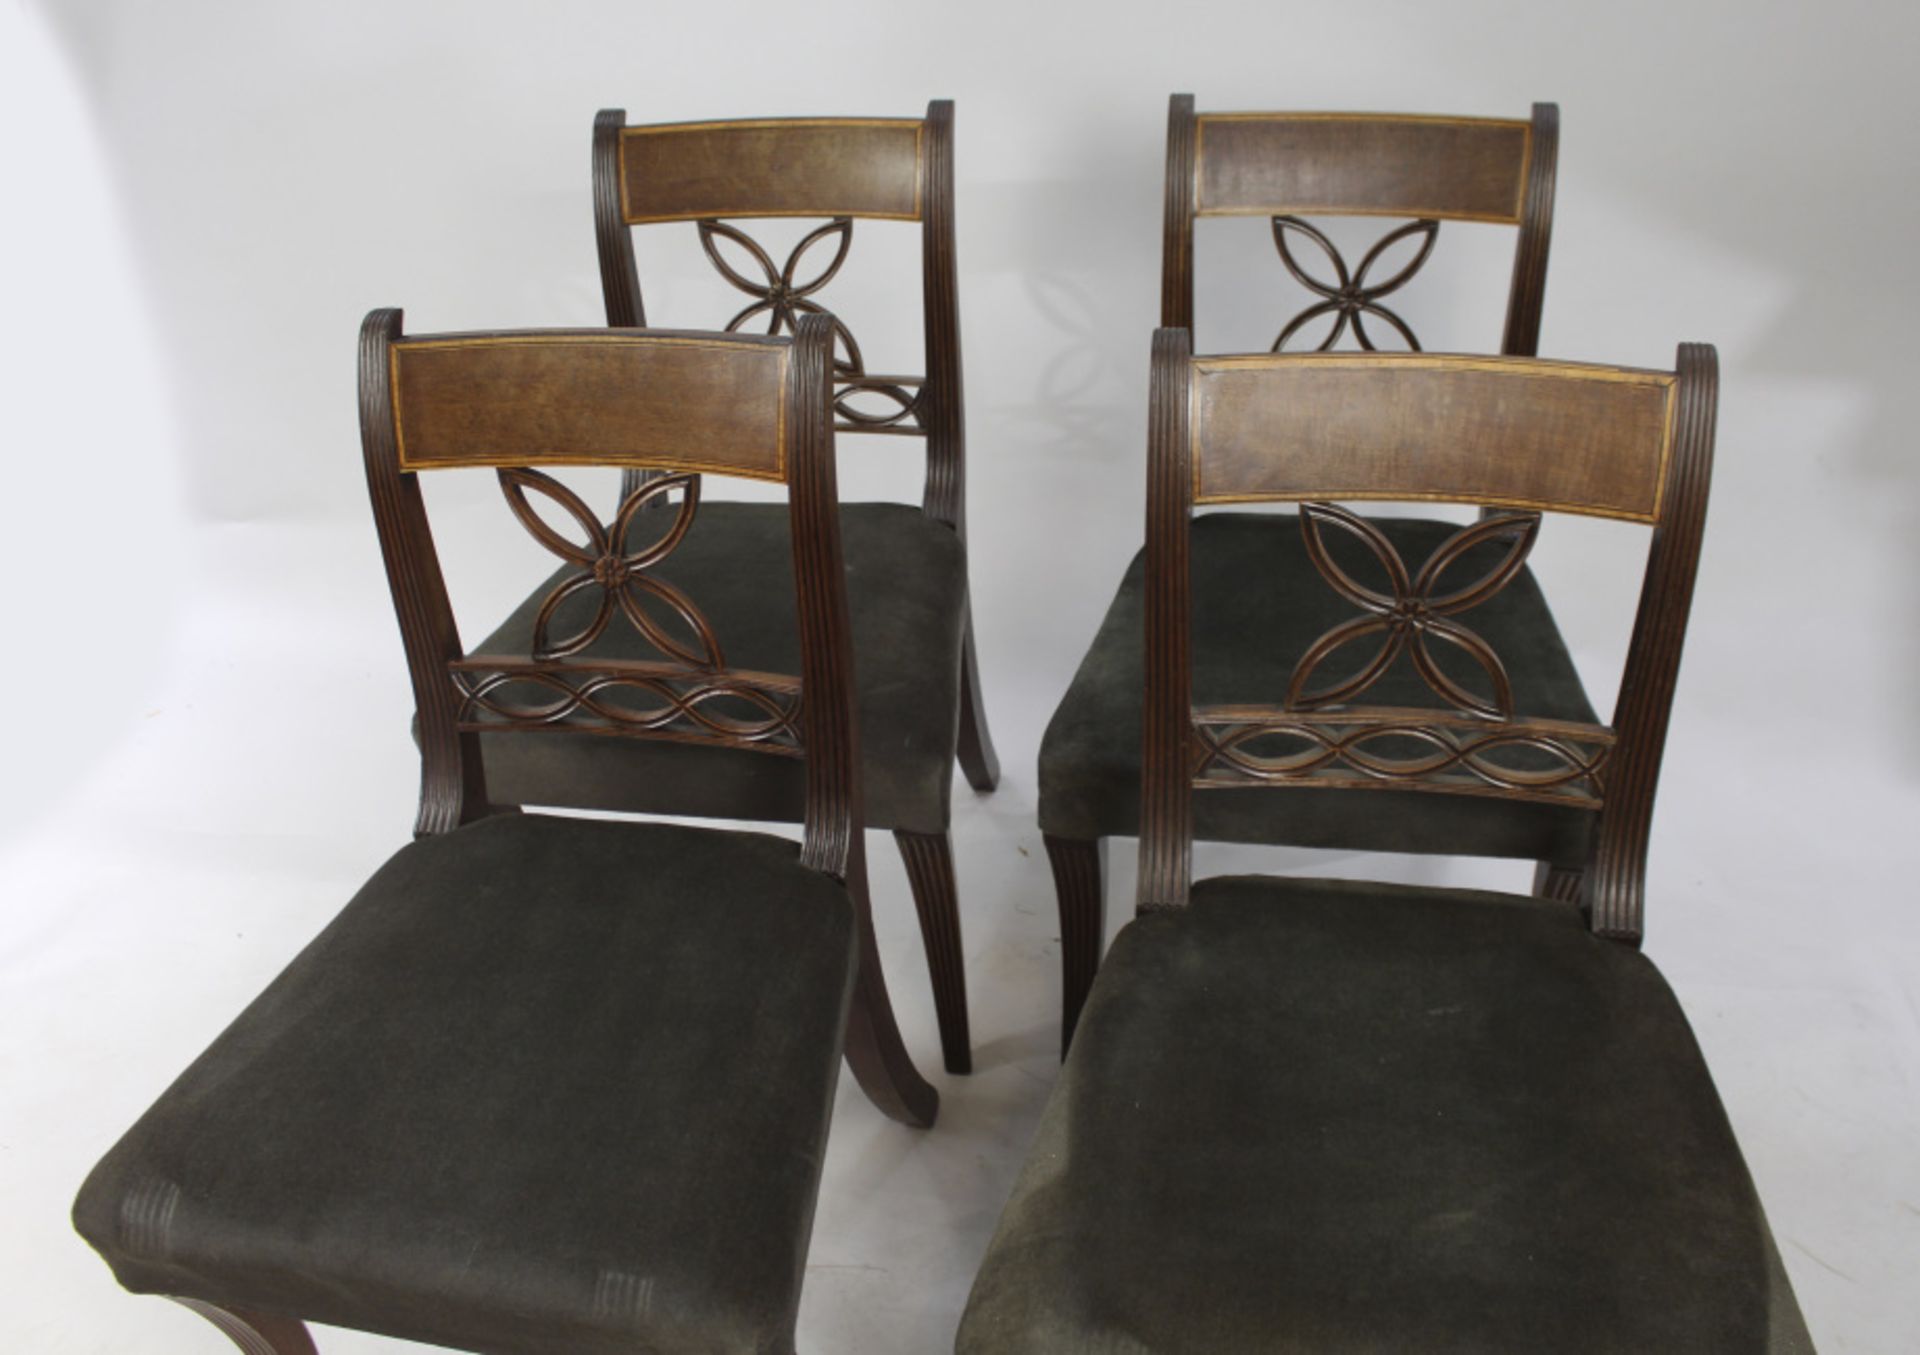 Set of 4 Early 19th c. Mahogany Chairs - Image 4 of 4